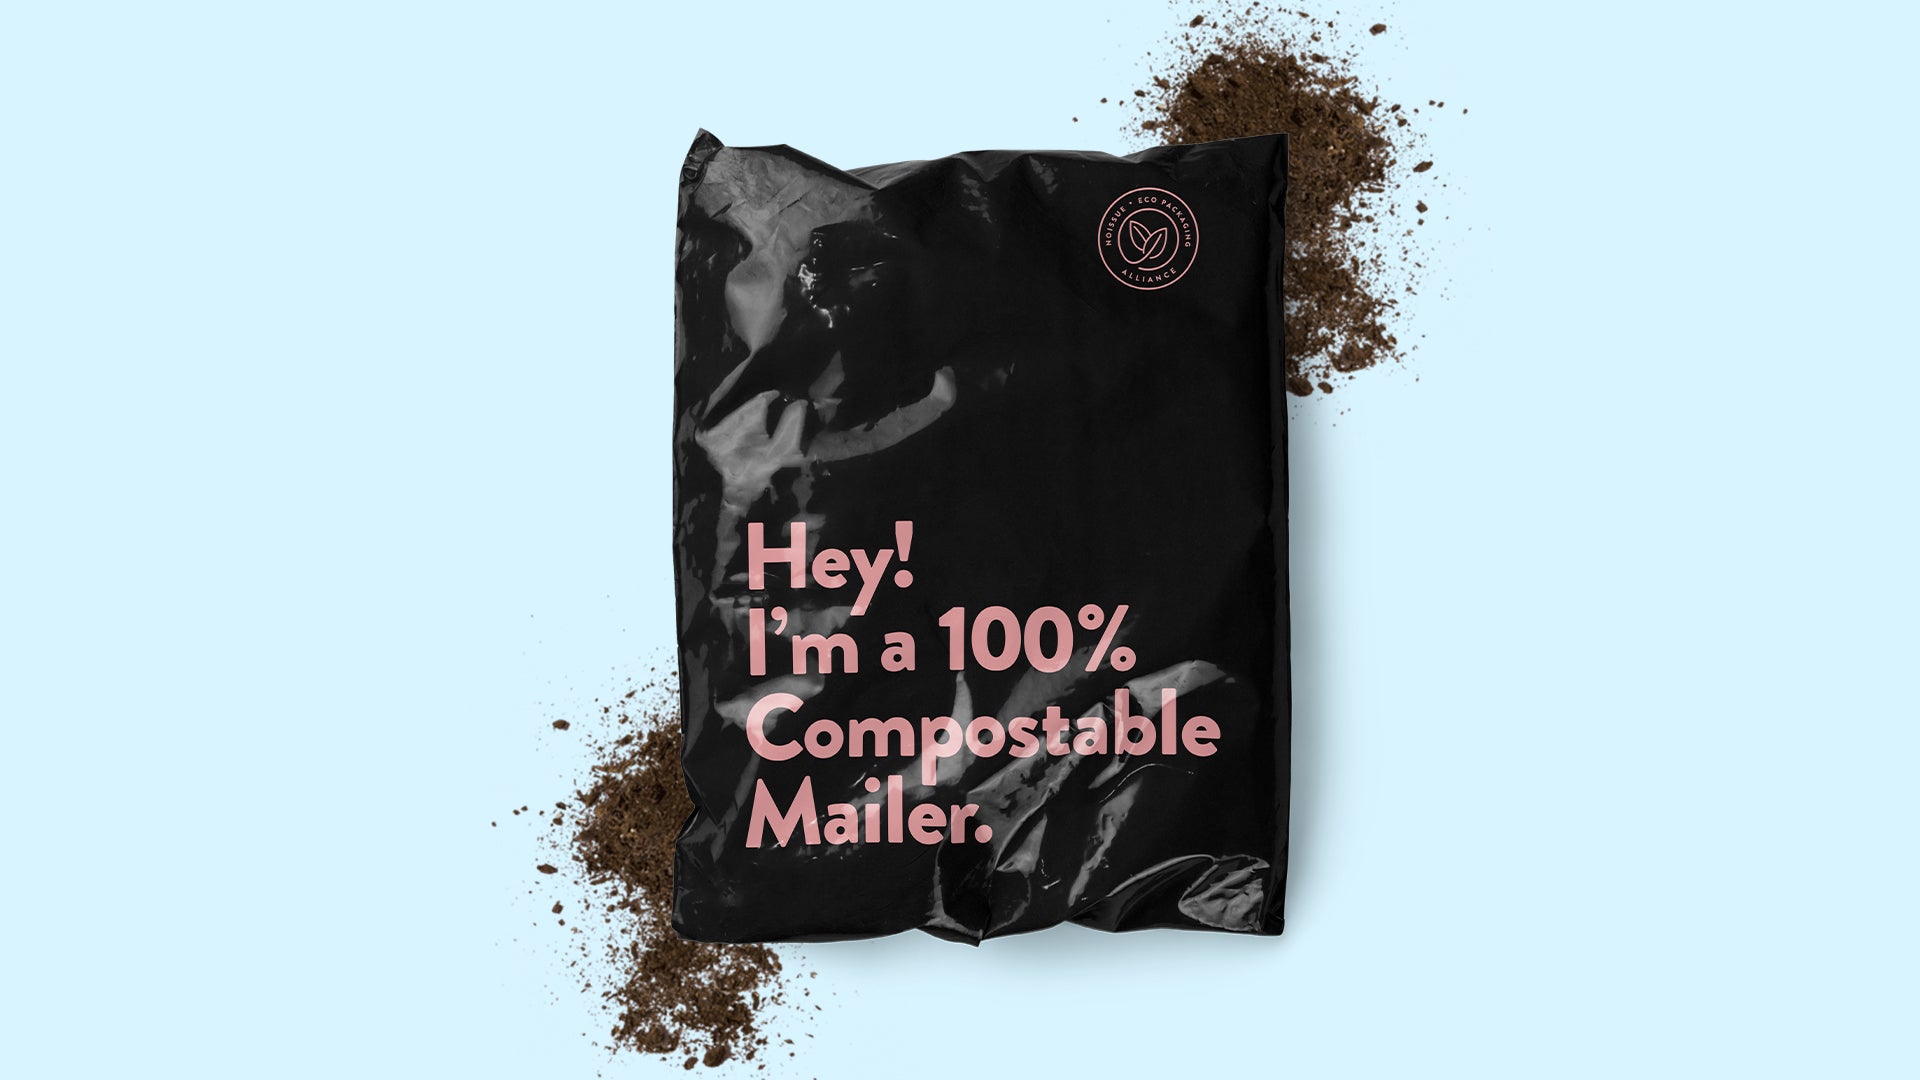 Black mailing envelope that reads "Hey! I'm a 100% compostable mailer" against a solid blue background